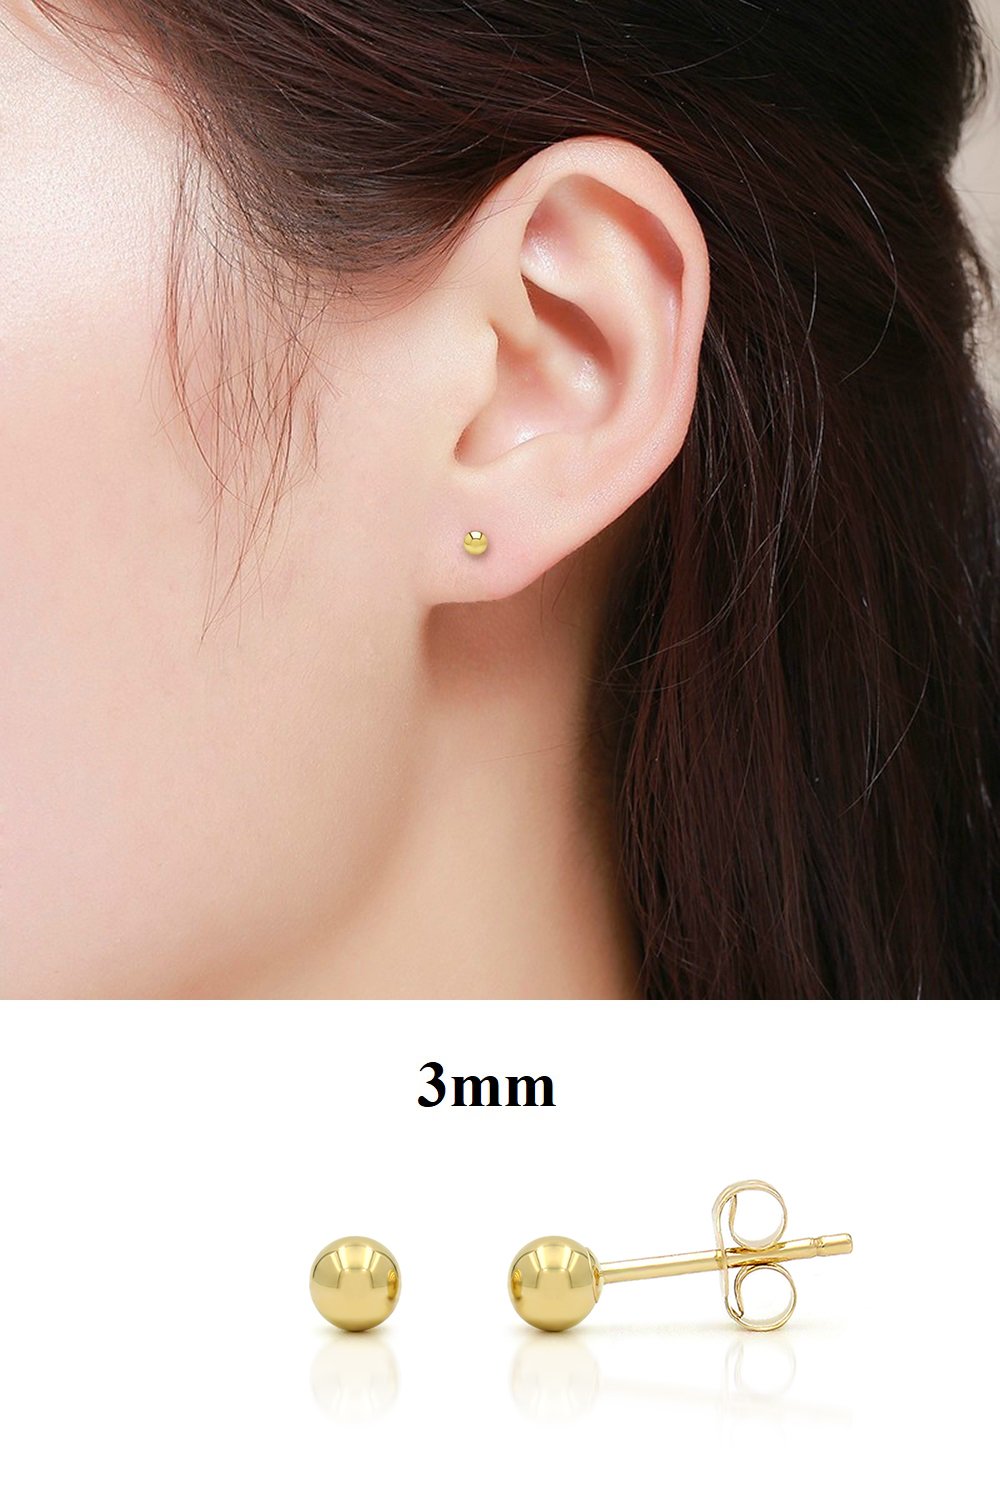 Cubic Zirconia Earrings | 3mm Round Pink | 22k Gold Plated Stainless Steel  Posts | Earrs International